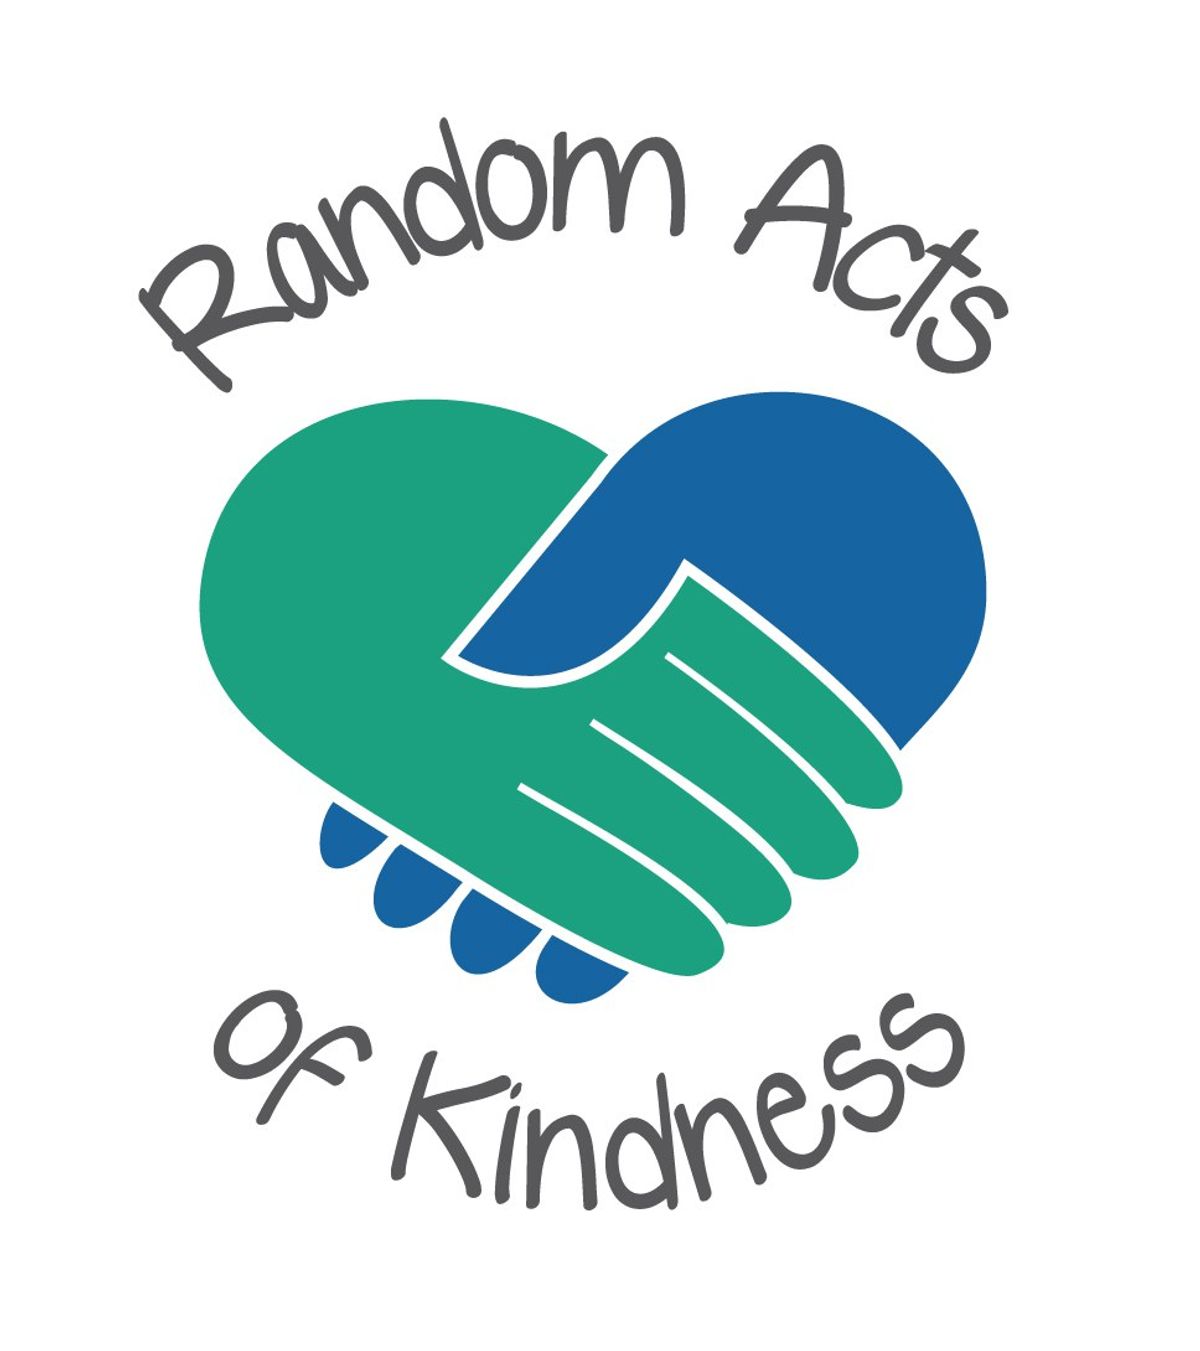 10 Random Acts Of Kindness